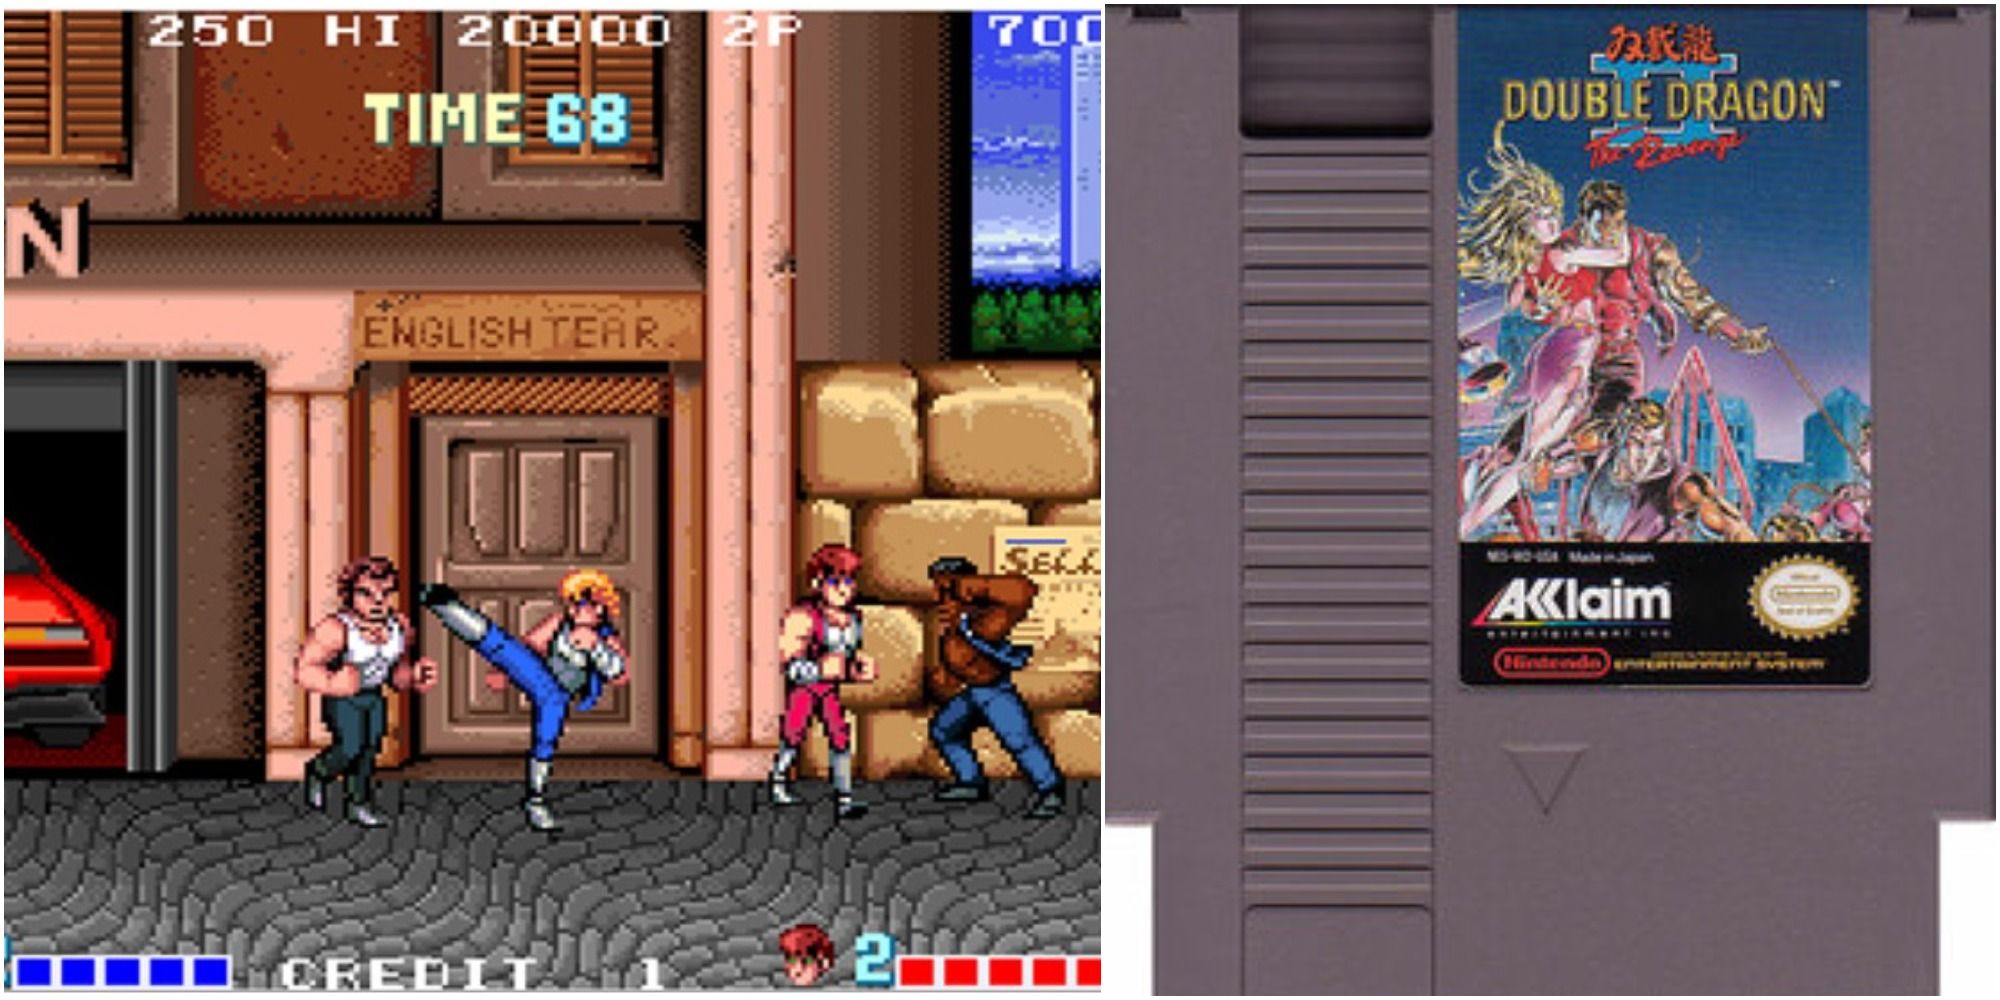 Double Dragon Nintendo Switch Online gameplay and NES cartridge